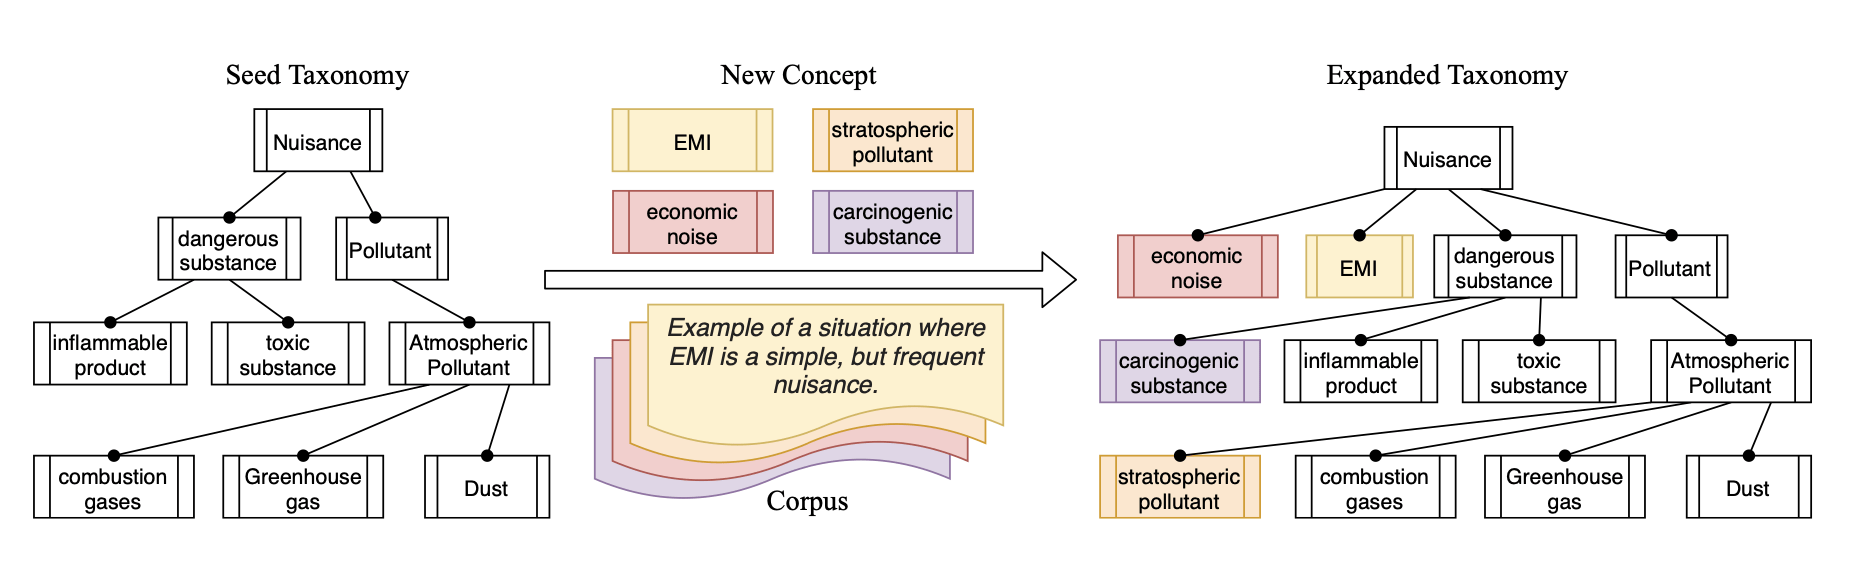 Illustration of the taxonomy expansion problem. Given an existing taxonomy, the task is to insert new concept terms (e.g., EMI, stratospheric pollutant, economic noise, carcinogenic substance) into the correct positions in the existing taxonomy